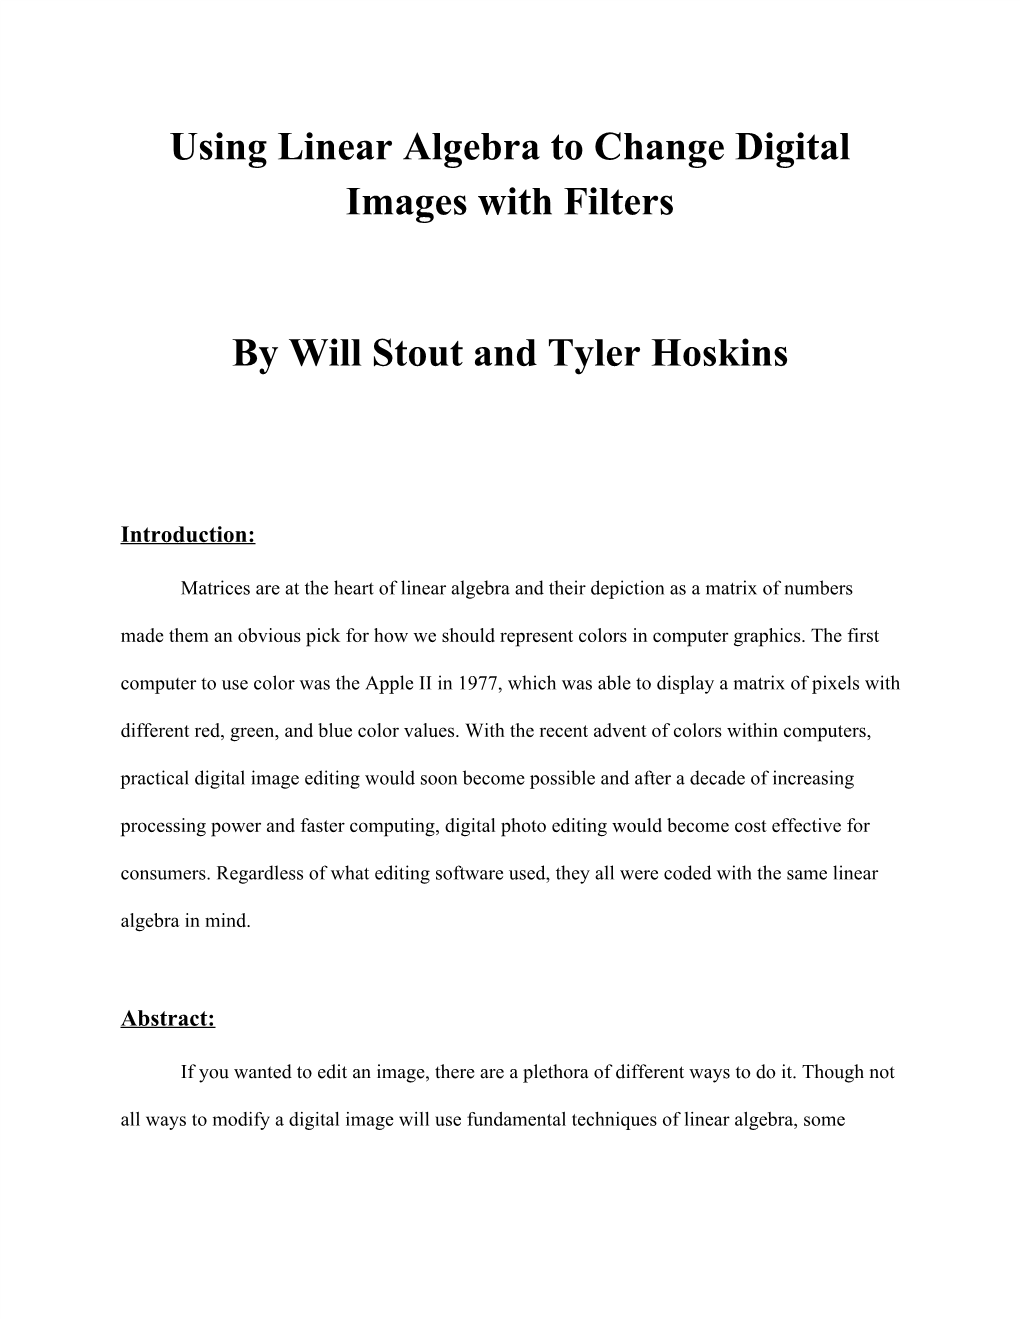 Using Linear Algebra to Change Digital Images with Filters by Will